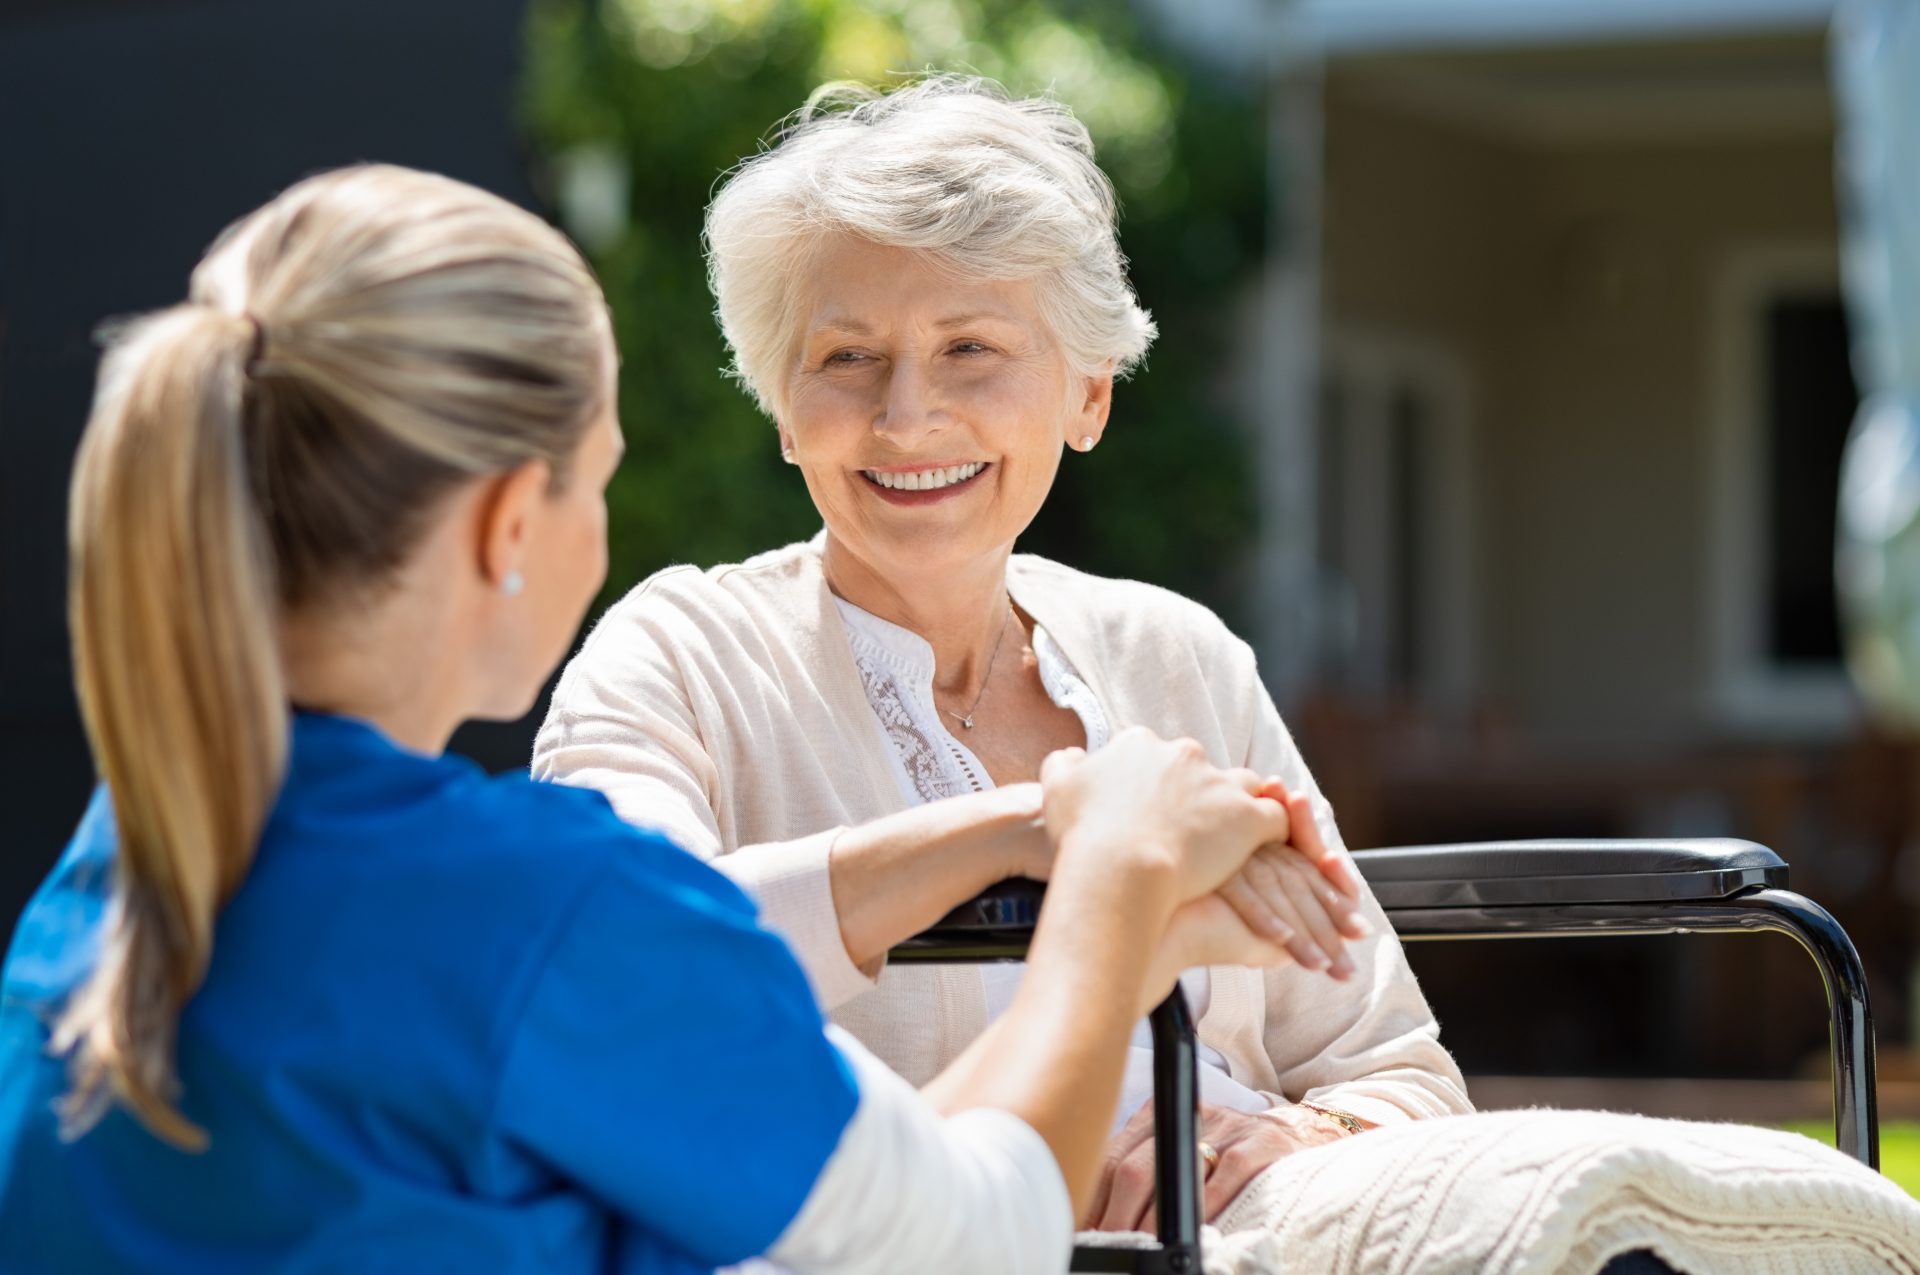 Insurance for care homes